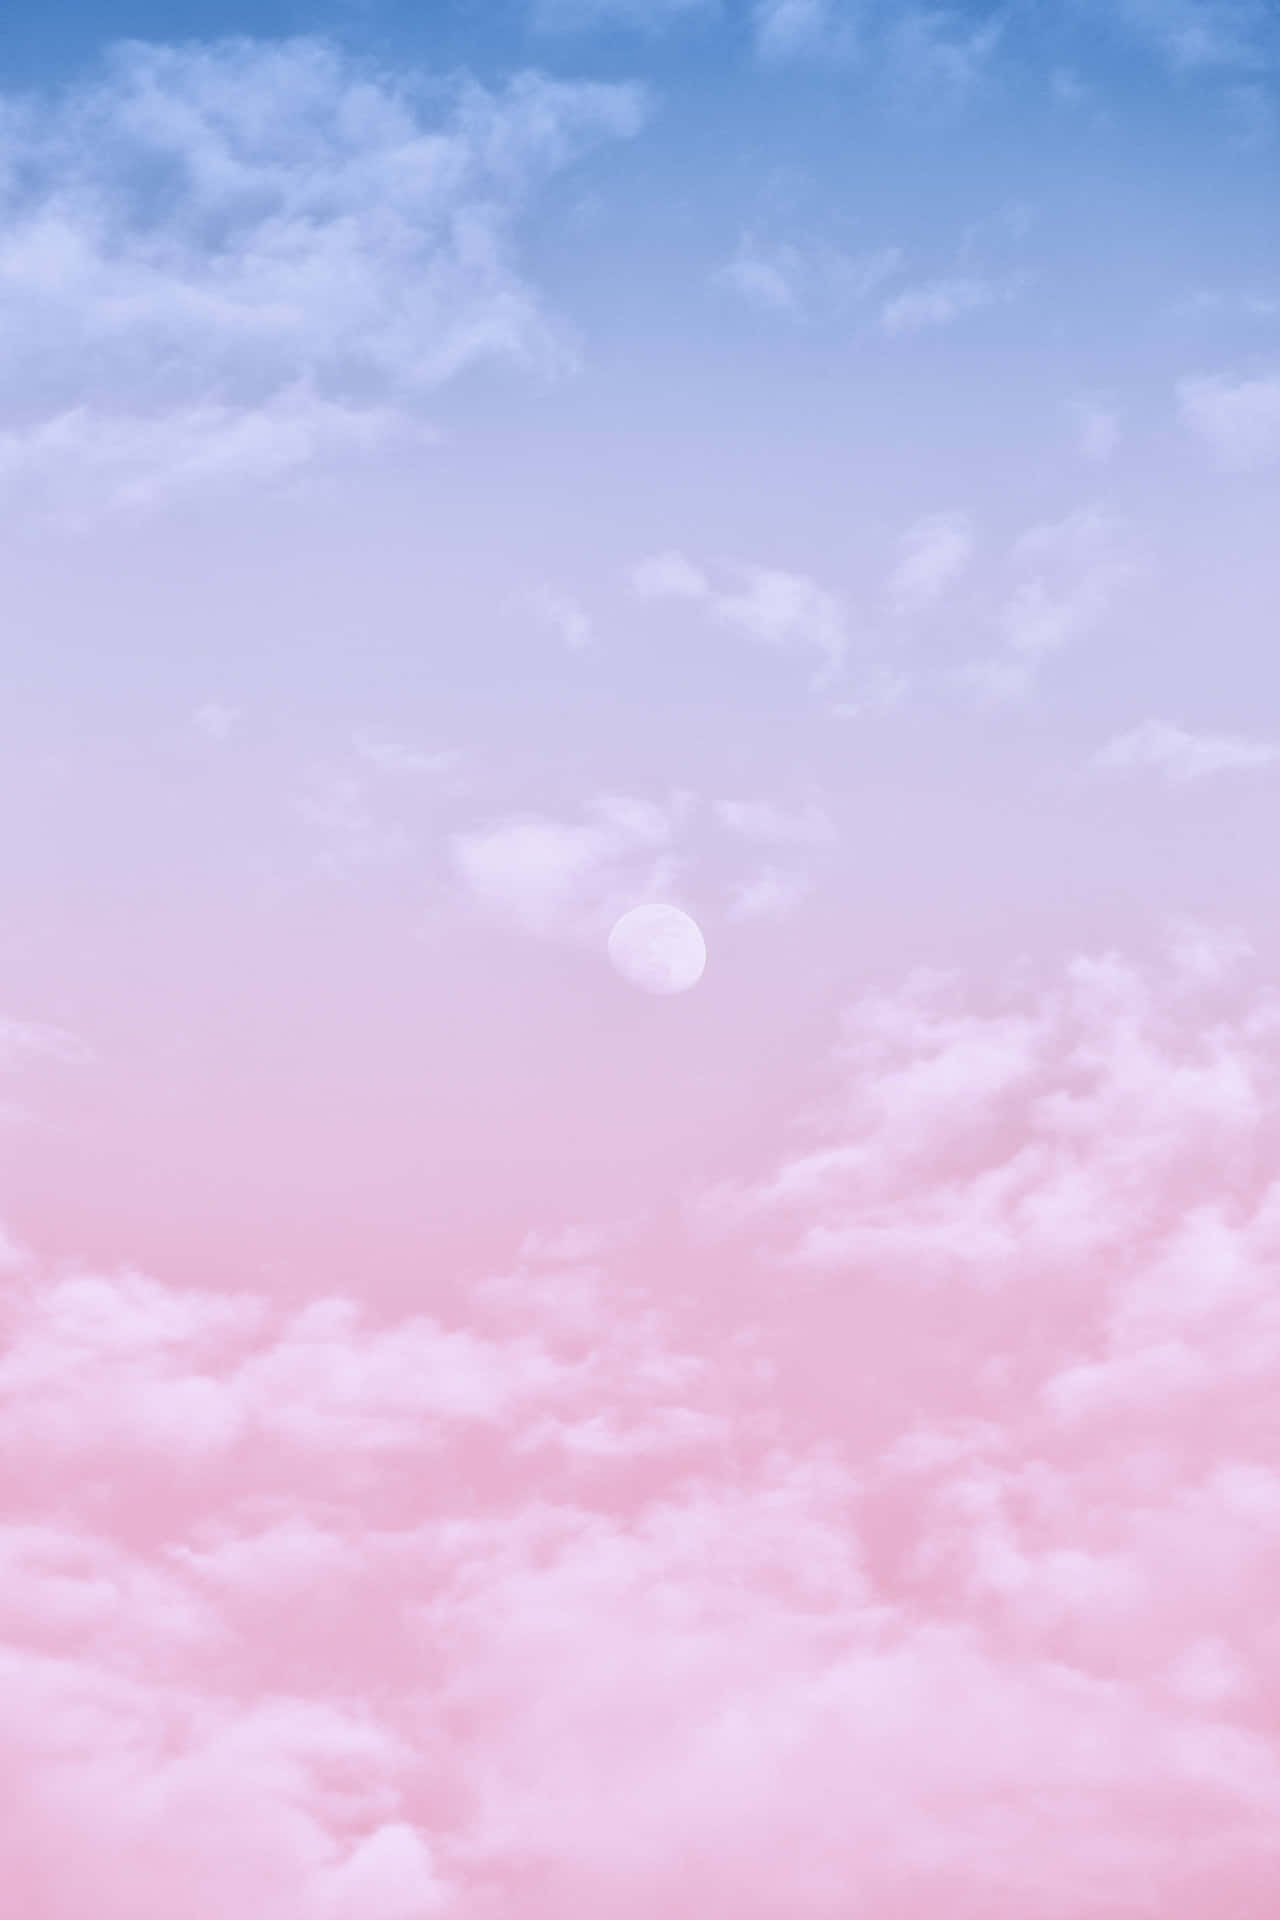 A beautiful sunset sky with pink and blue clouds Wallpaper